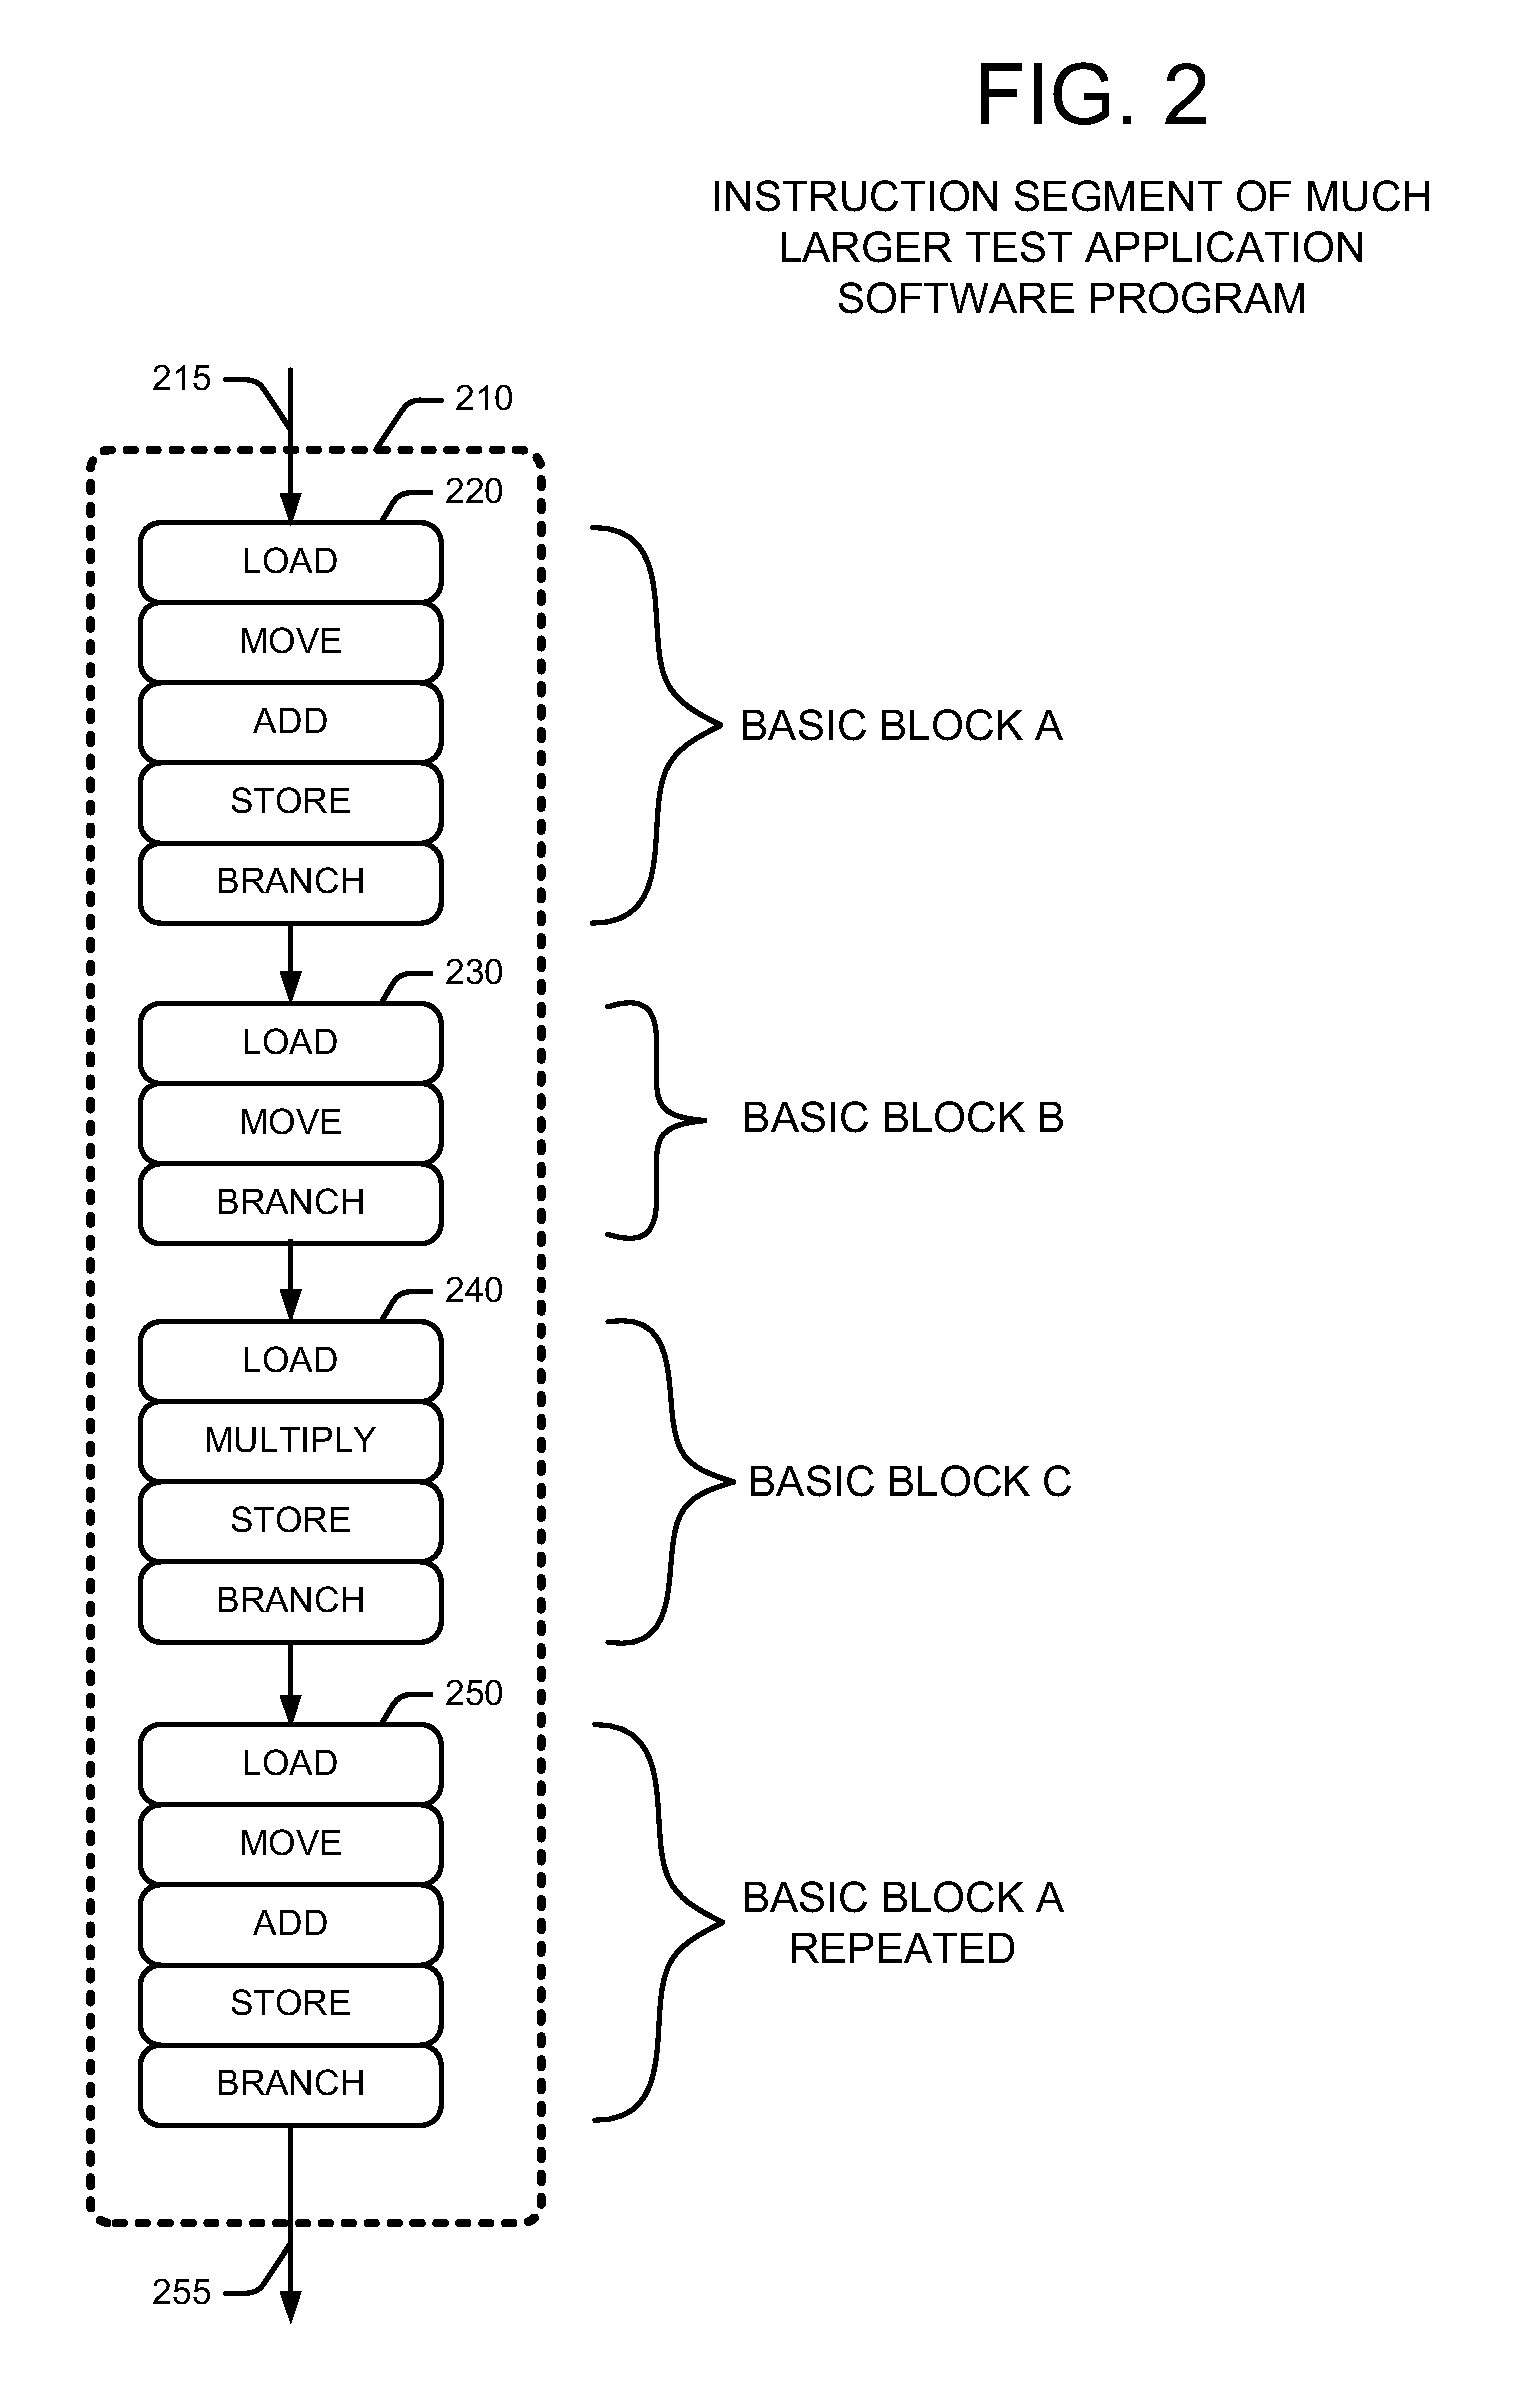 Method and apparatus for evaluating integrated circuit design model performance using basic block vectors and fly-by vectors including microarchitecture dependent information